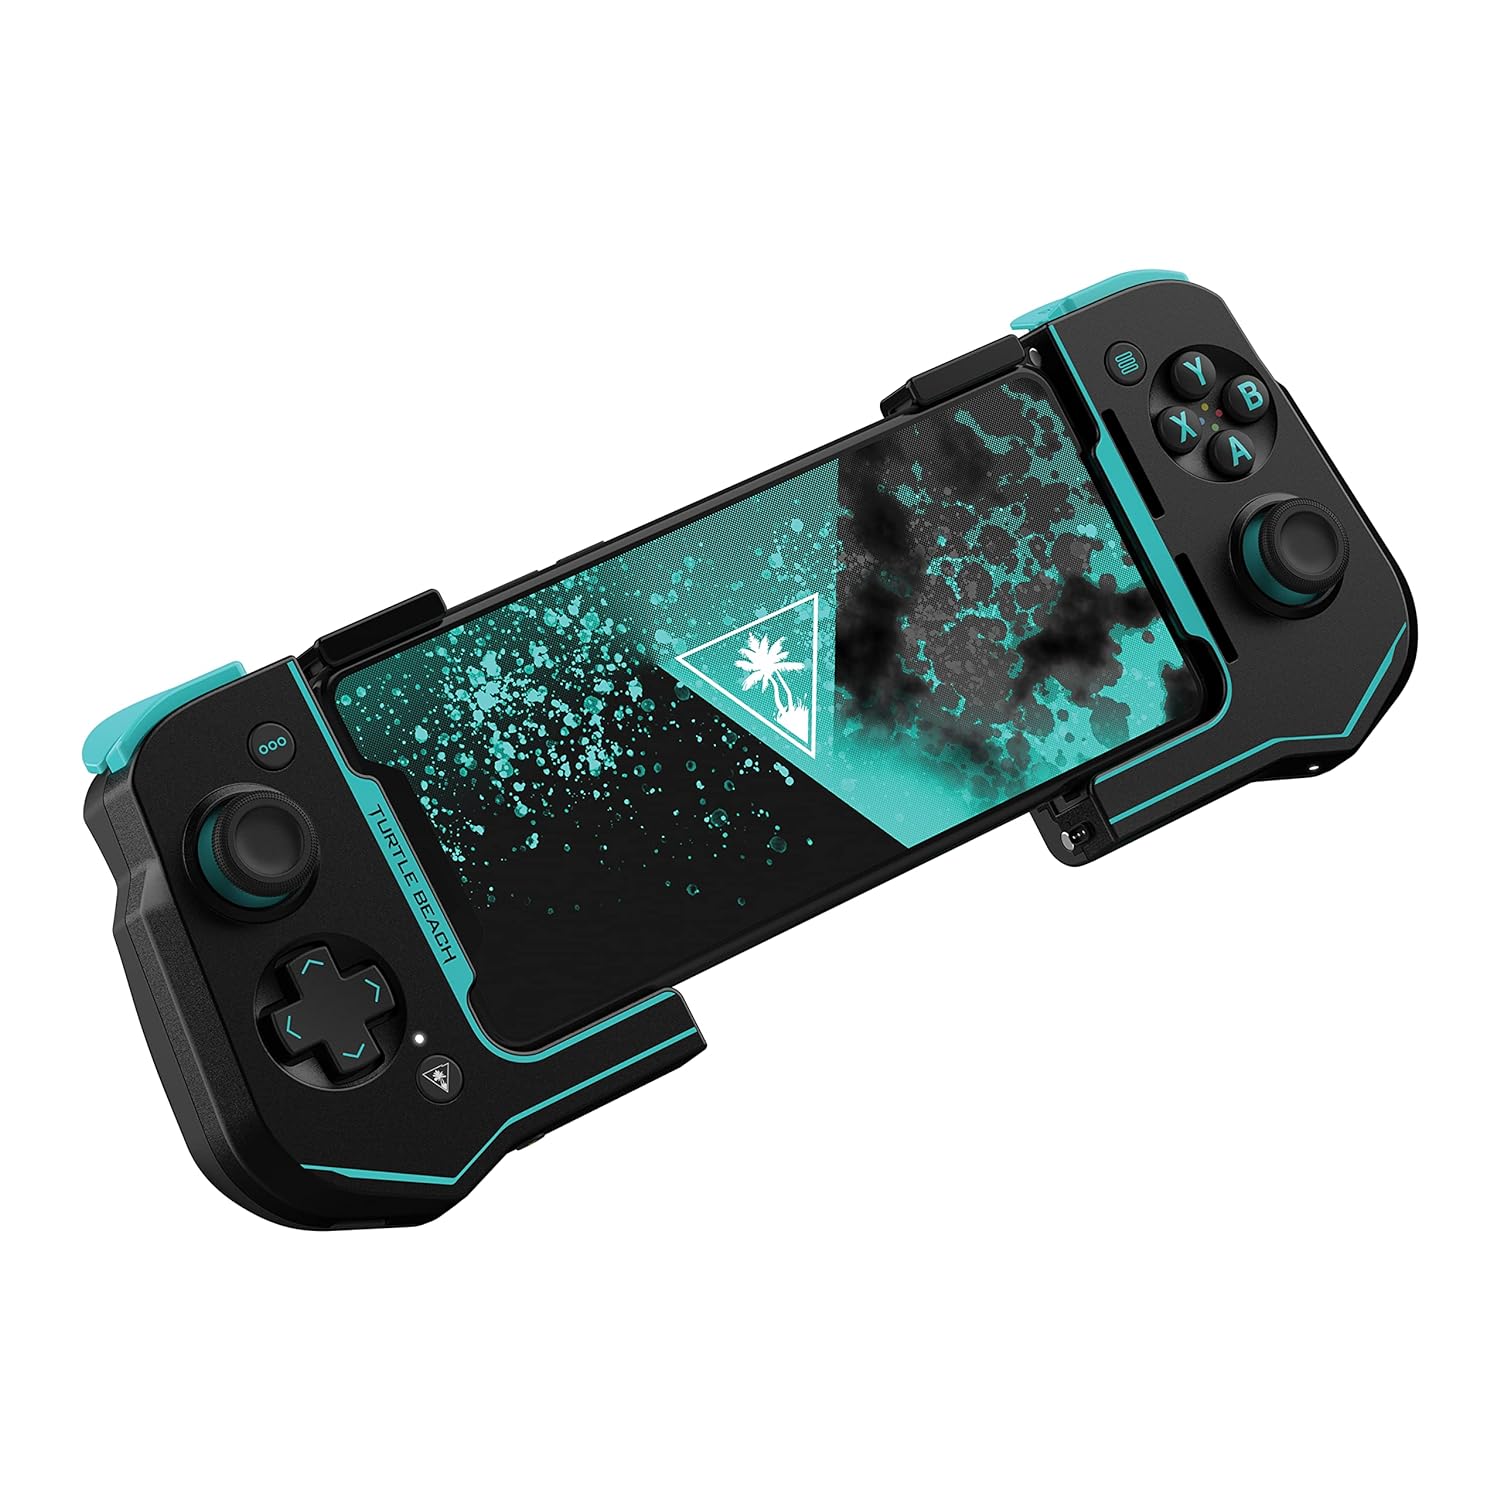 Turtle Beach Atom Mobile Game Controller with Bluetooth for Cloud Gaming on iPhone with Compact Shape, Console Style Controls  Low Latency Bluetooth – Cobalt Blue